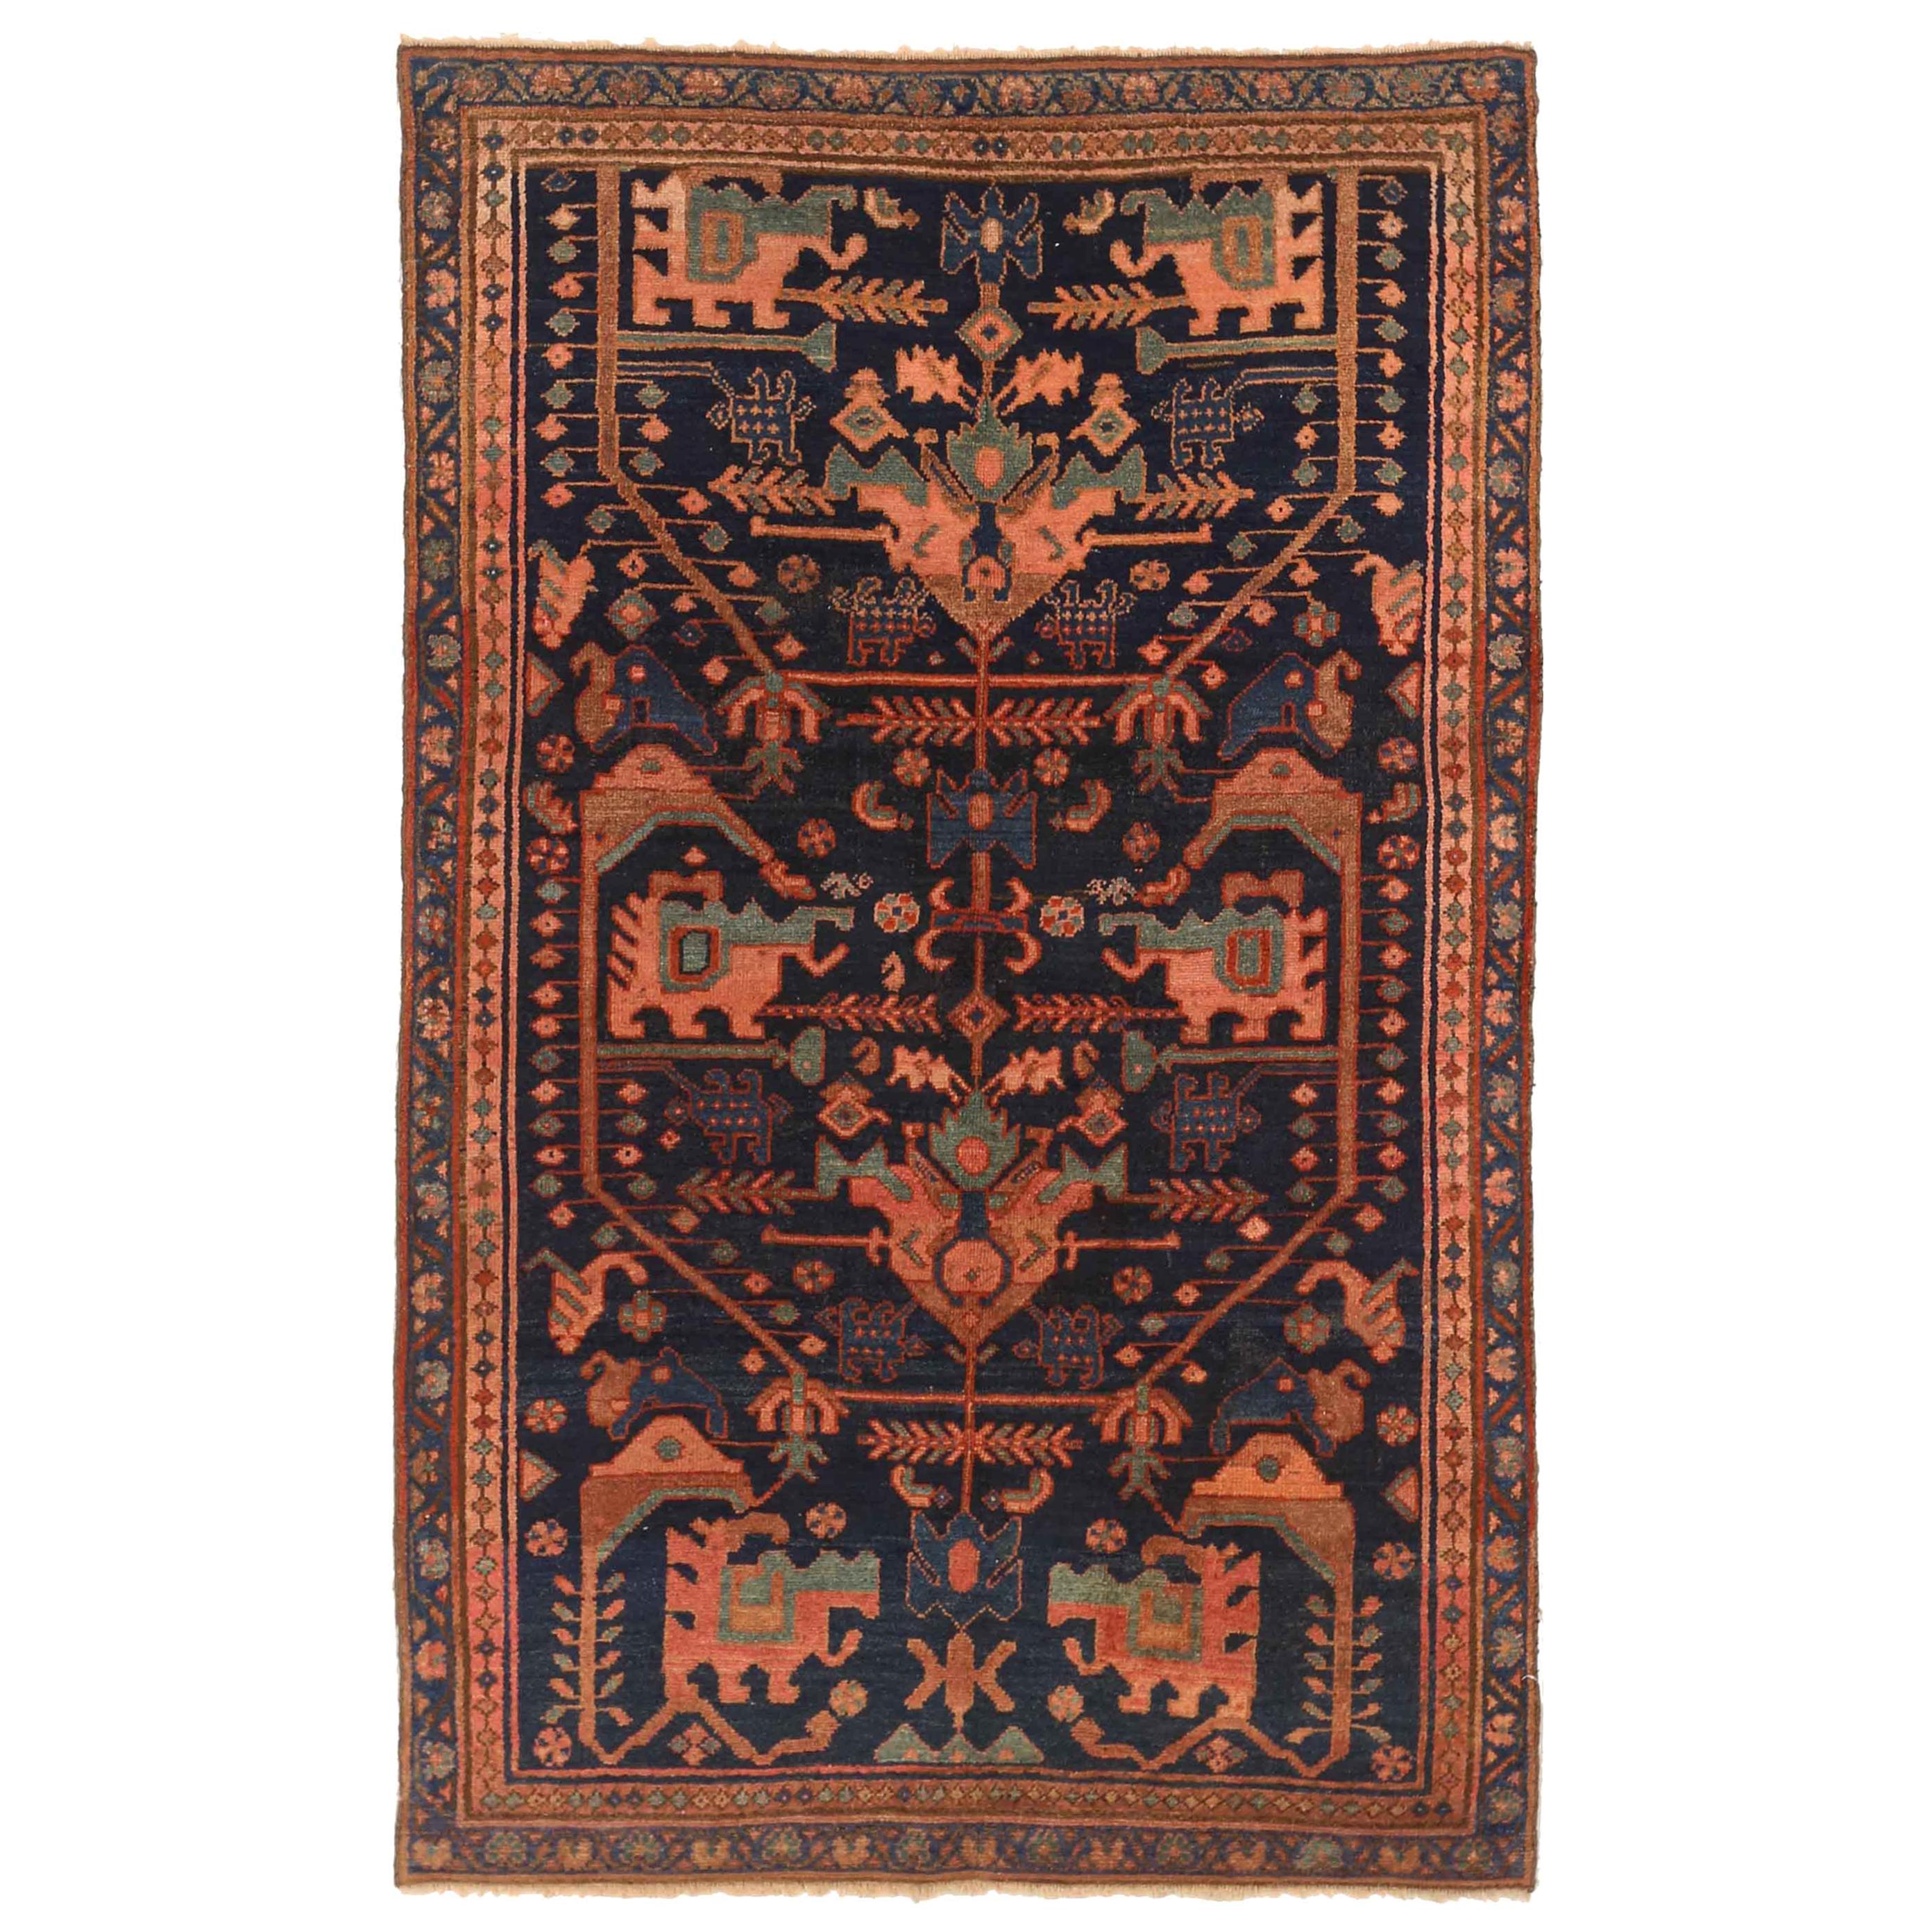 Antique Persian Hamedan Rug with Red and Green Mixed Animal and Floral Patterns